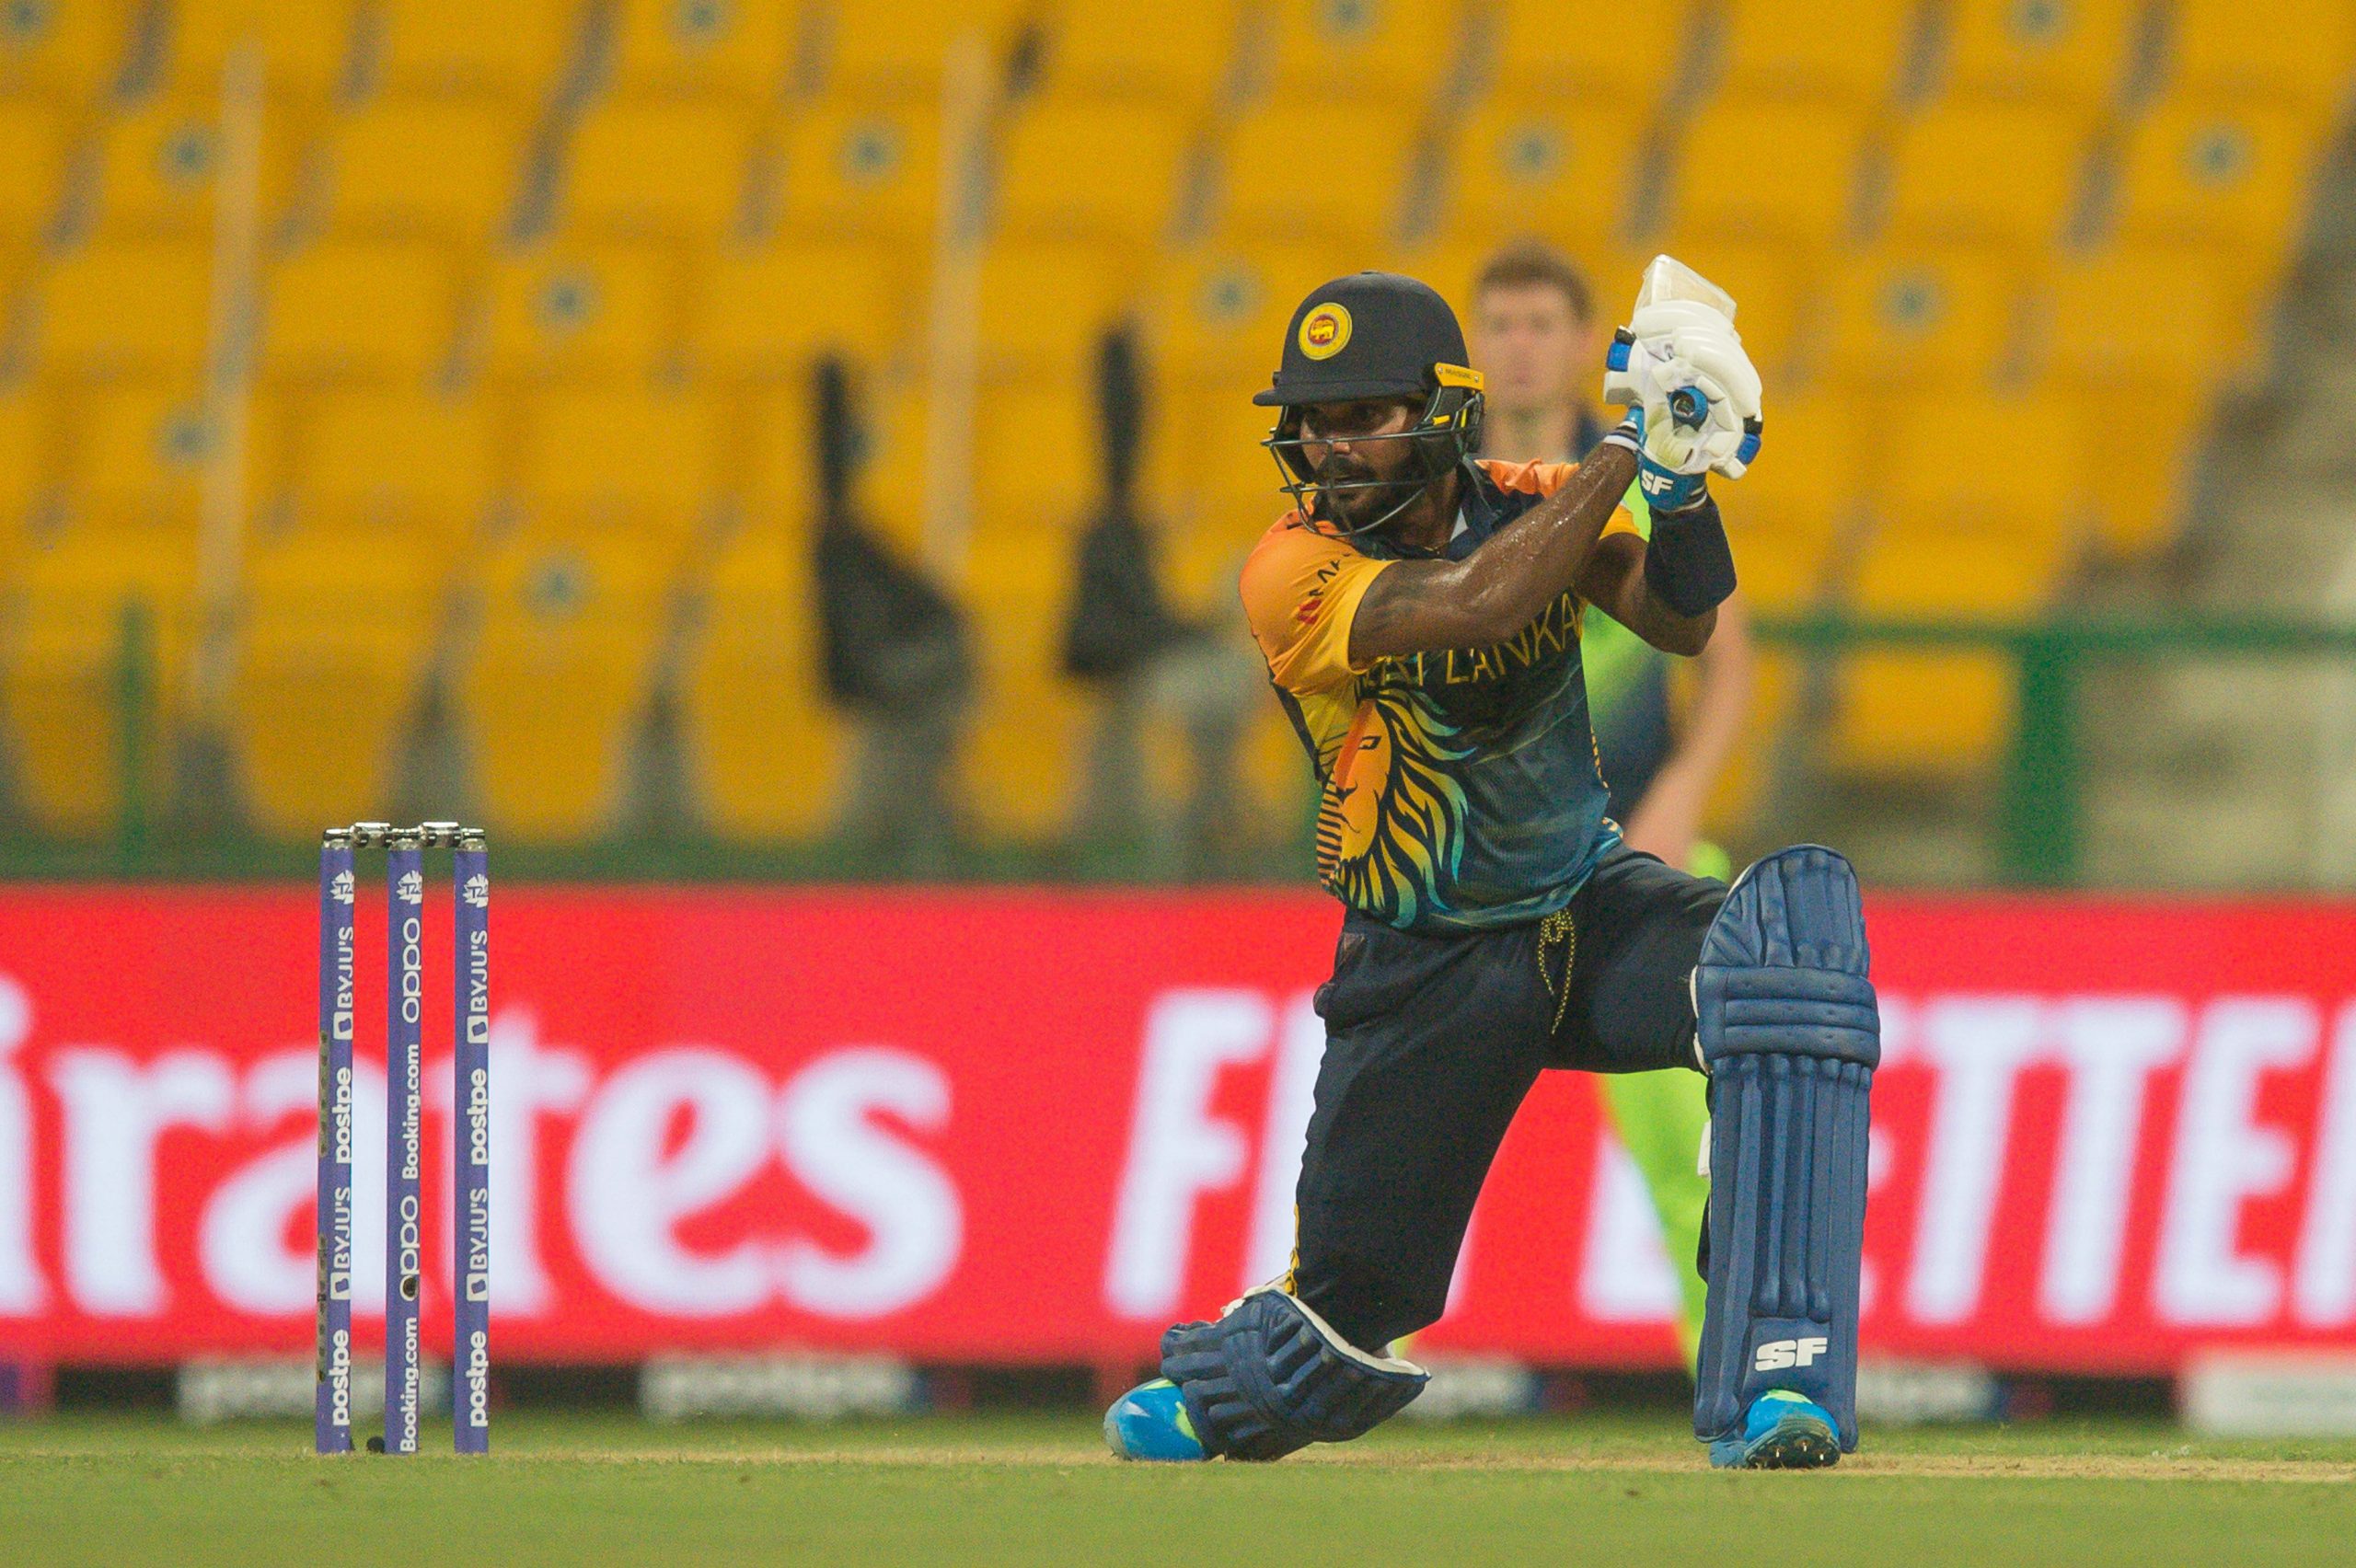 Sri Lanka rise from early peril to demolish Ireland by 70 runs to make it to the Super Stage